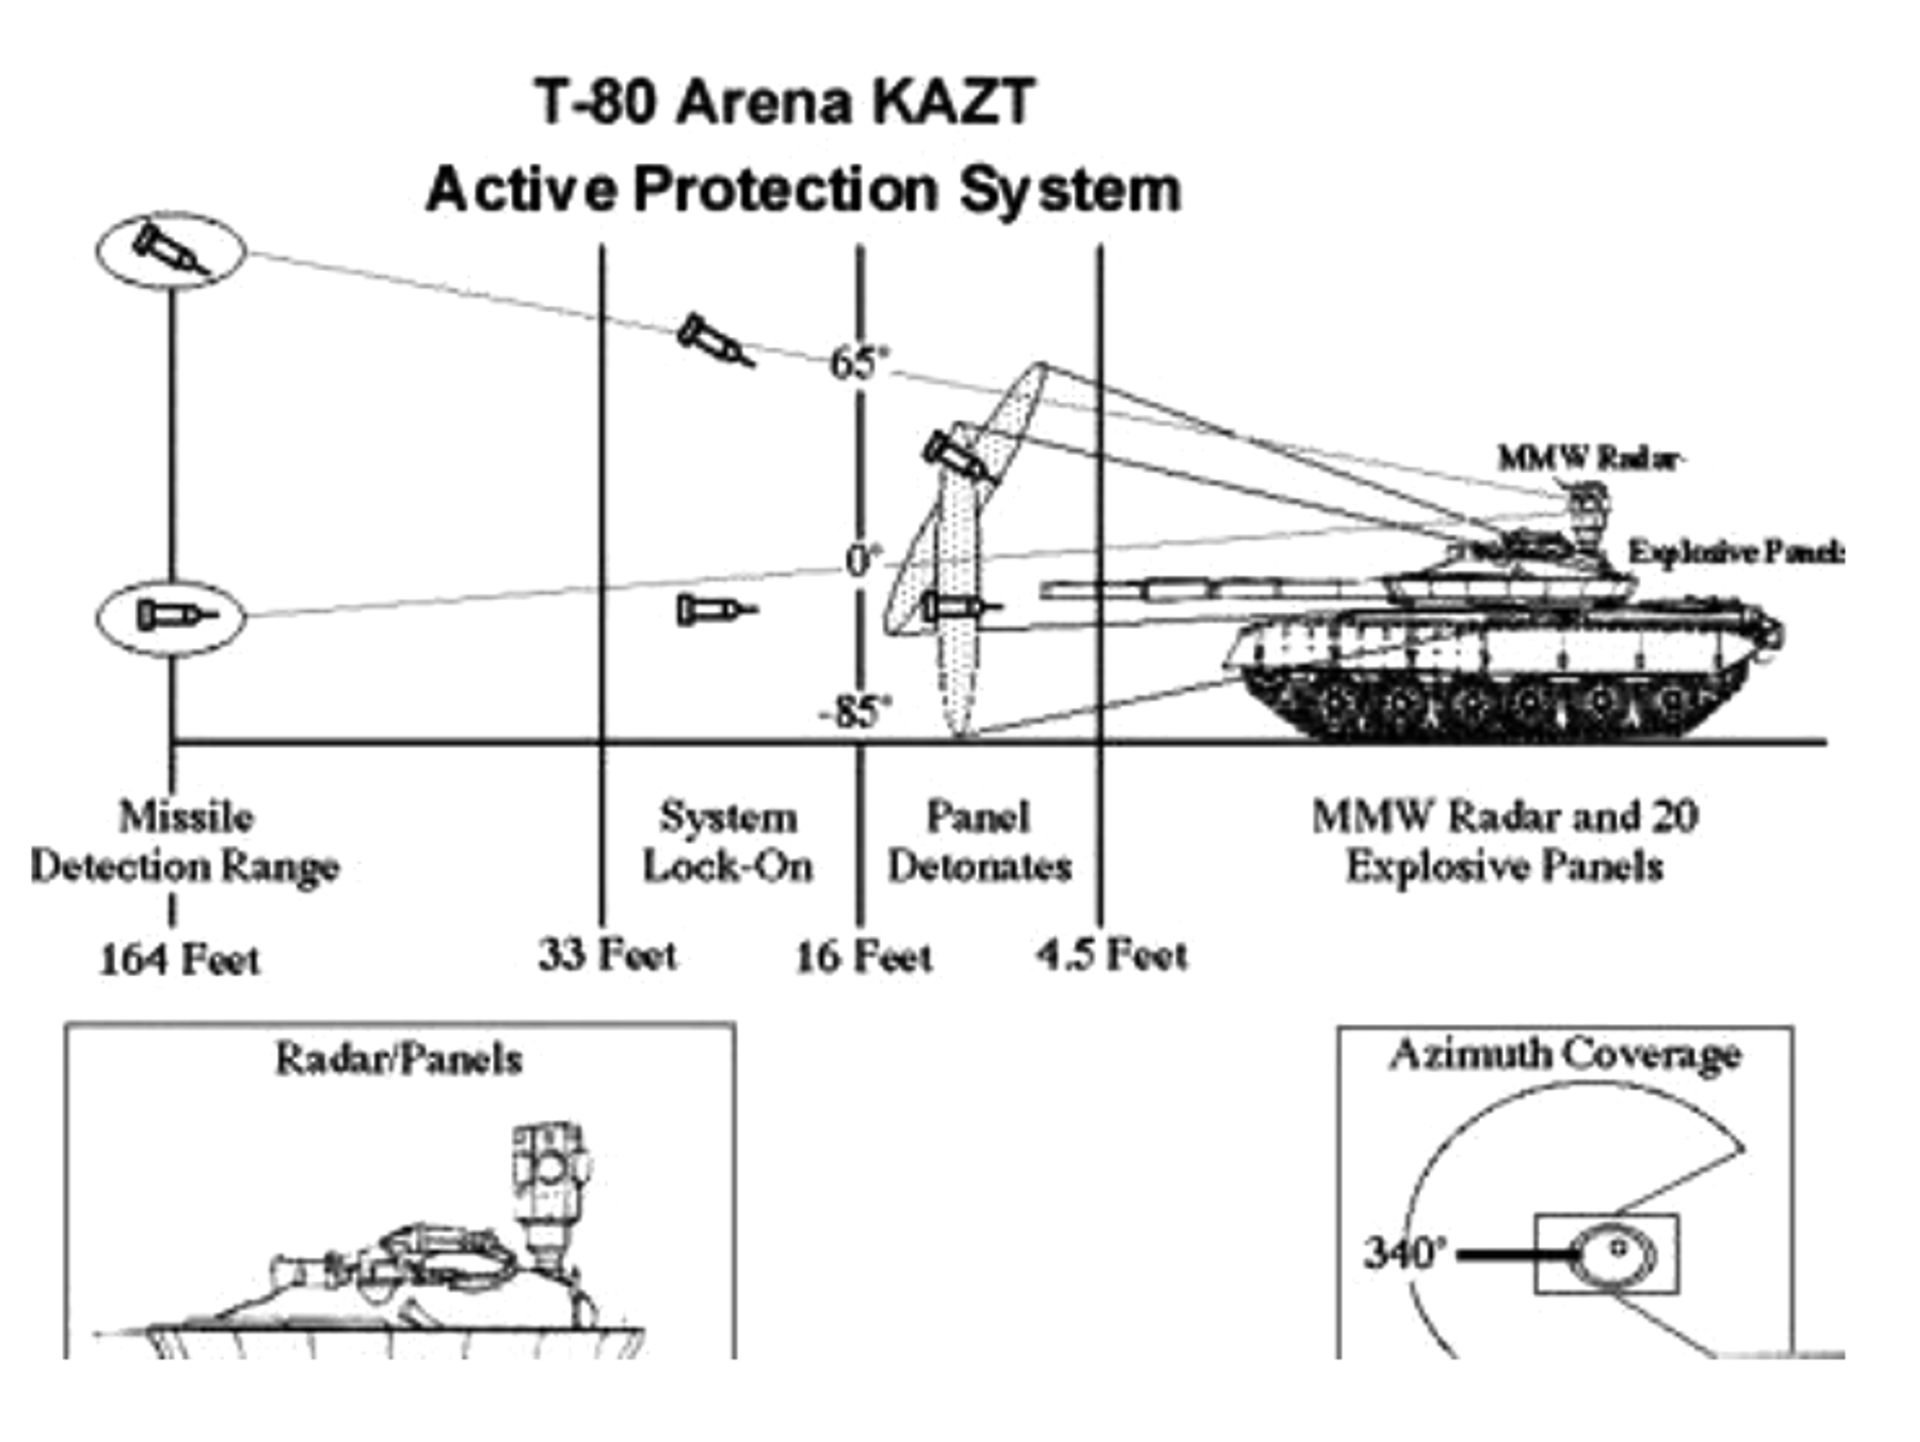 Description of Arena Active Protection System from 1990 Marine Corps Warfighting Publications manual. - Sputnik International, 1920, 17.02.2024